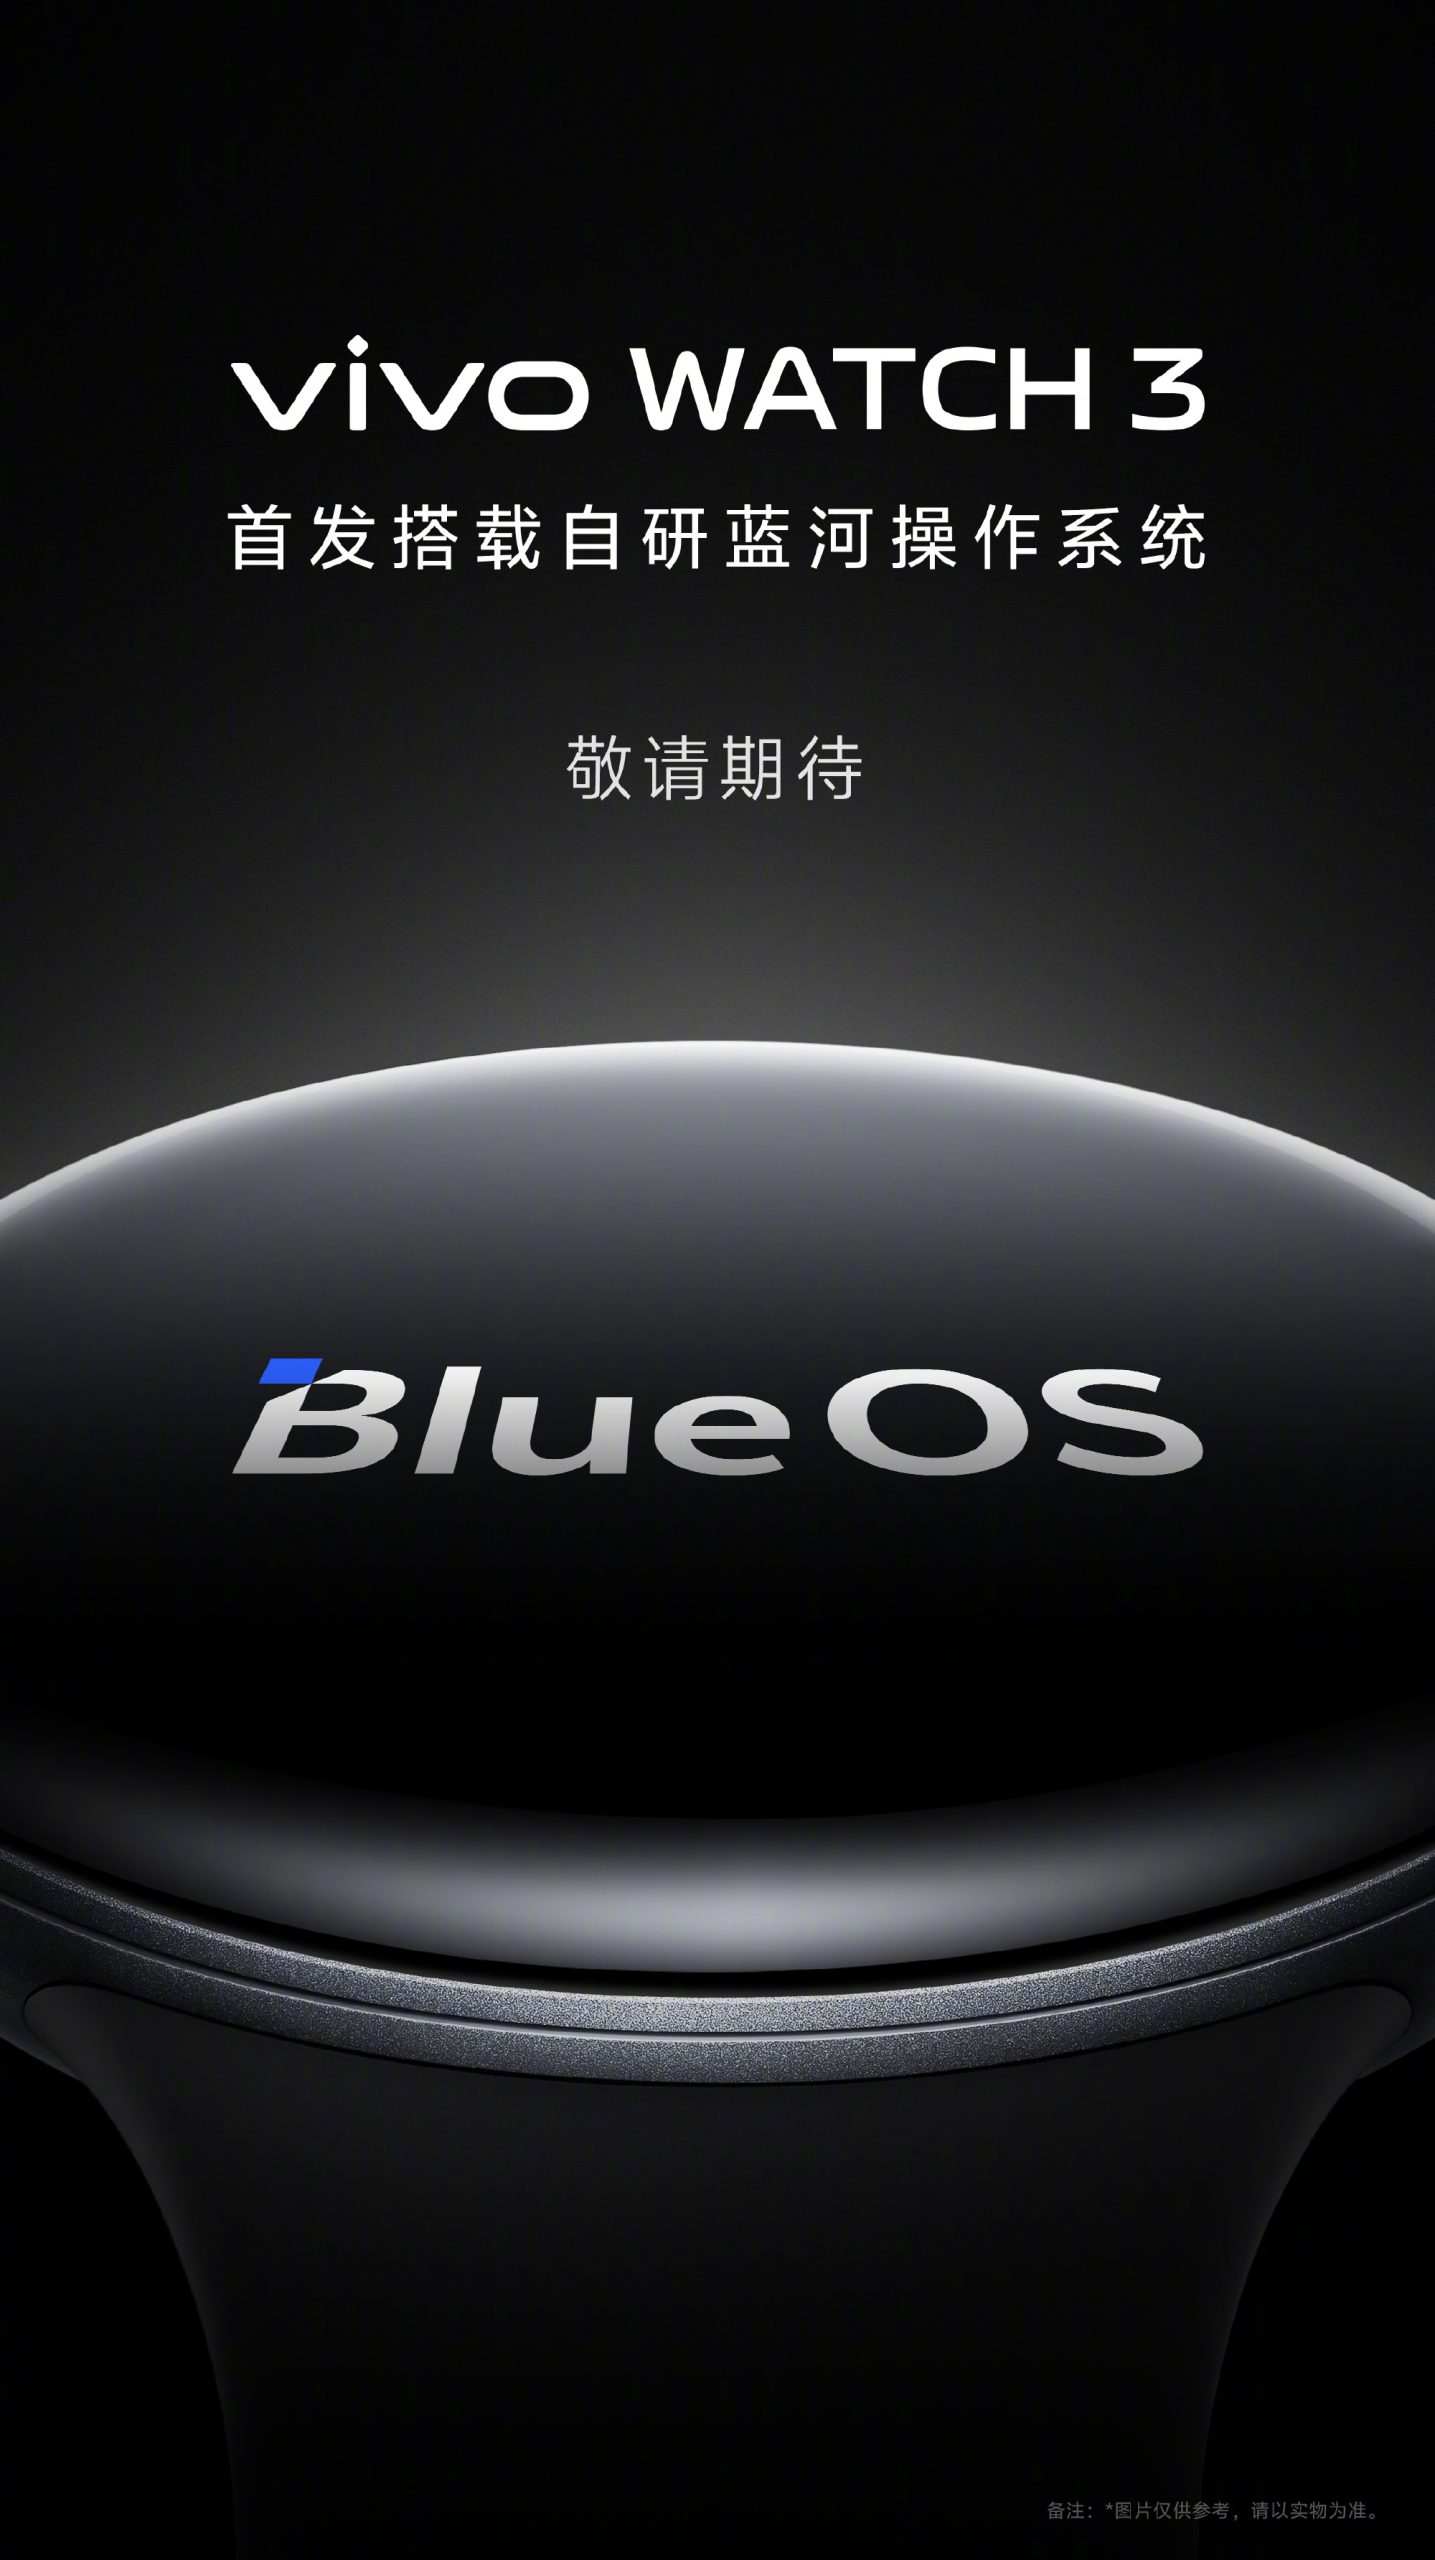 Vivo Watch 3 with Blue OS